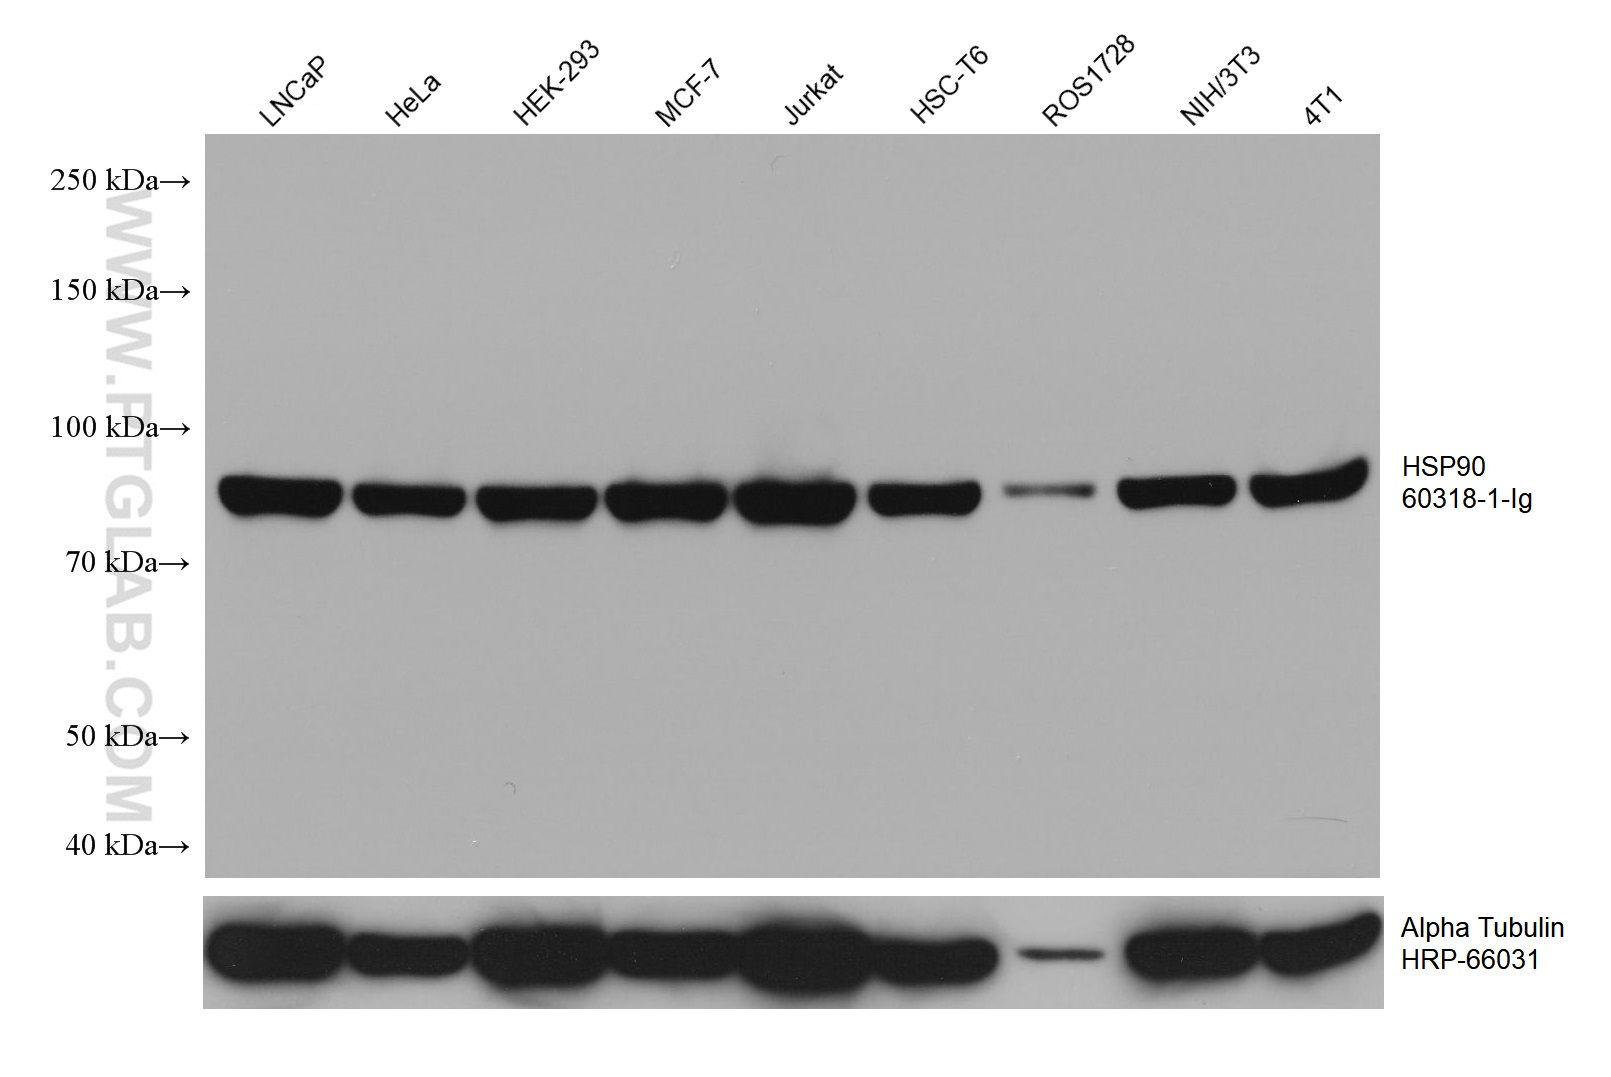 Various lysates were subjected to SDS PAGE followed by western blot with 60318-1-Ig (HSP90 antibody) at dilution of 1:20000 incubated at room temperature for 1.5 hours. The membrane was stripped and reblotted with HRP-conjugated Alpha Tubulin Monoclonal antibody (HRP-66031) as loading control.